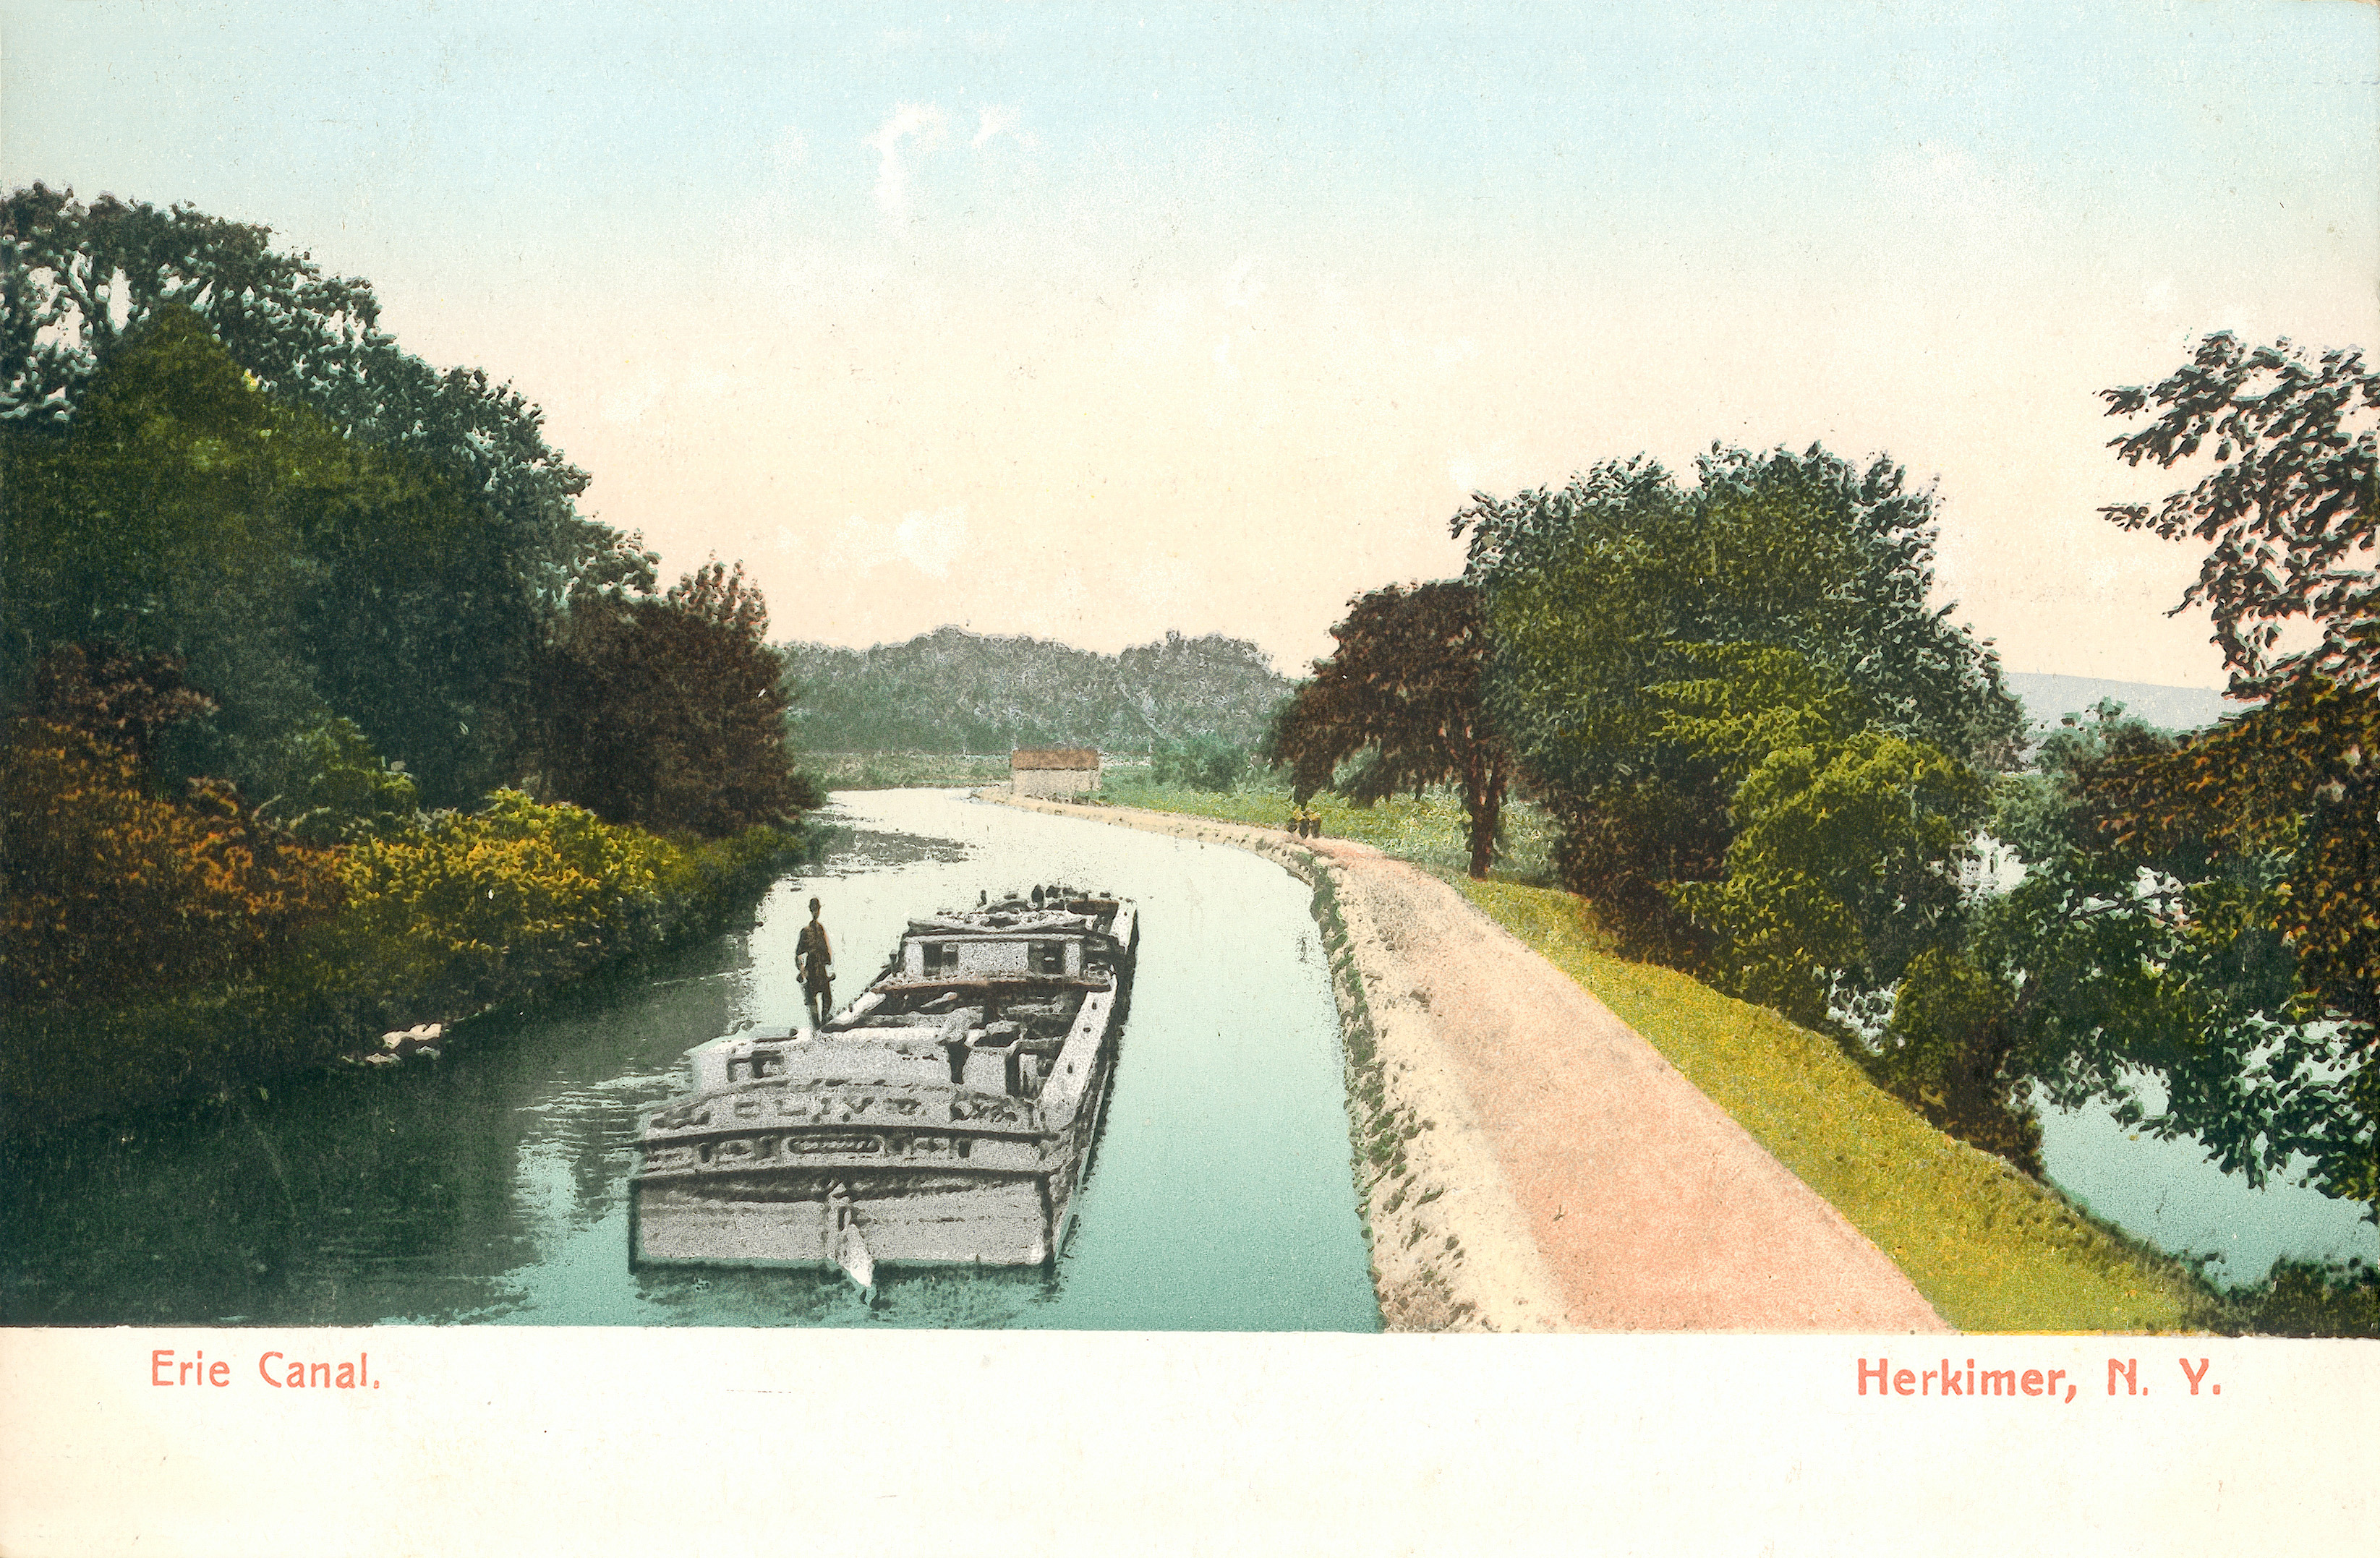 "Erie Canal, Herkimer, N.Y." (A 5784, American News Company, New York) 